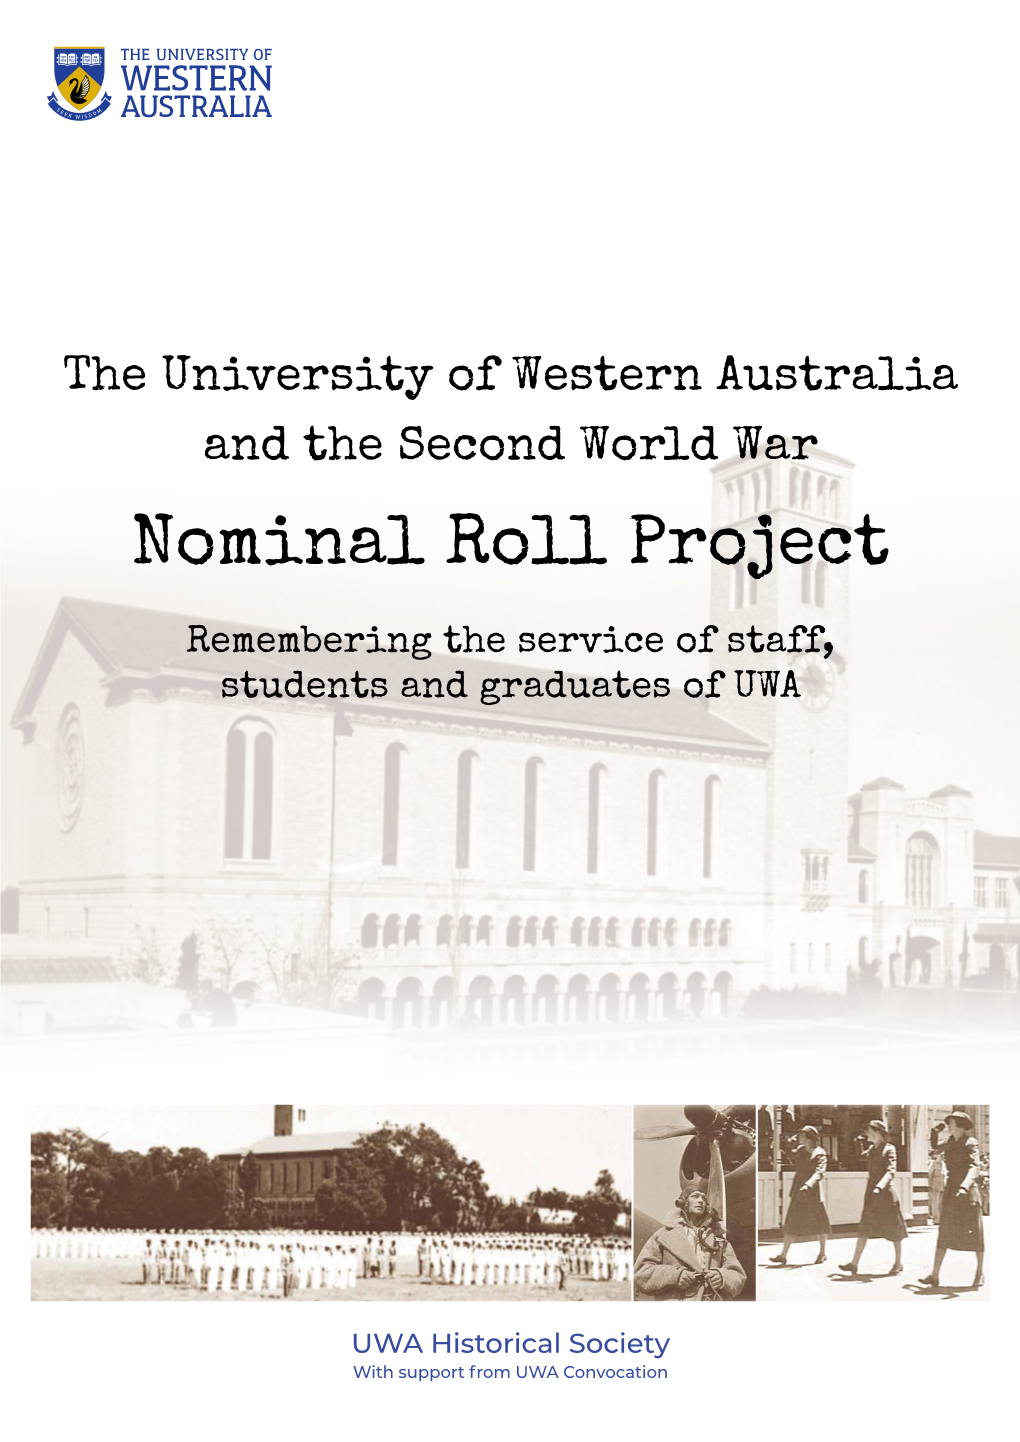 Nominal Roll Project